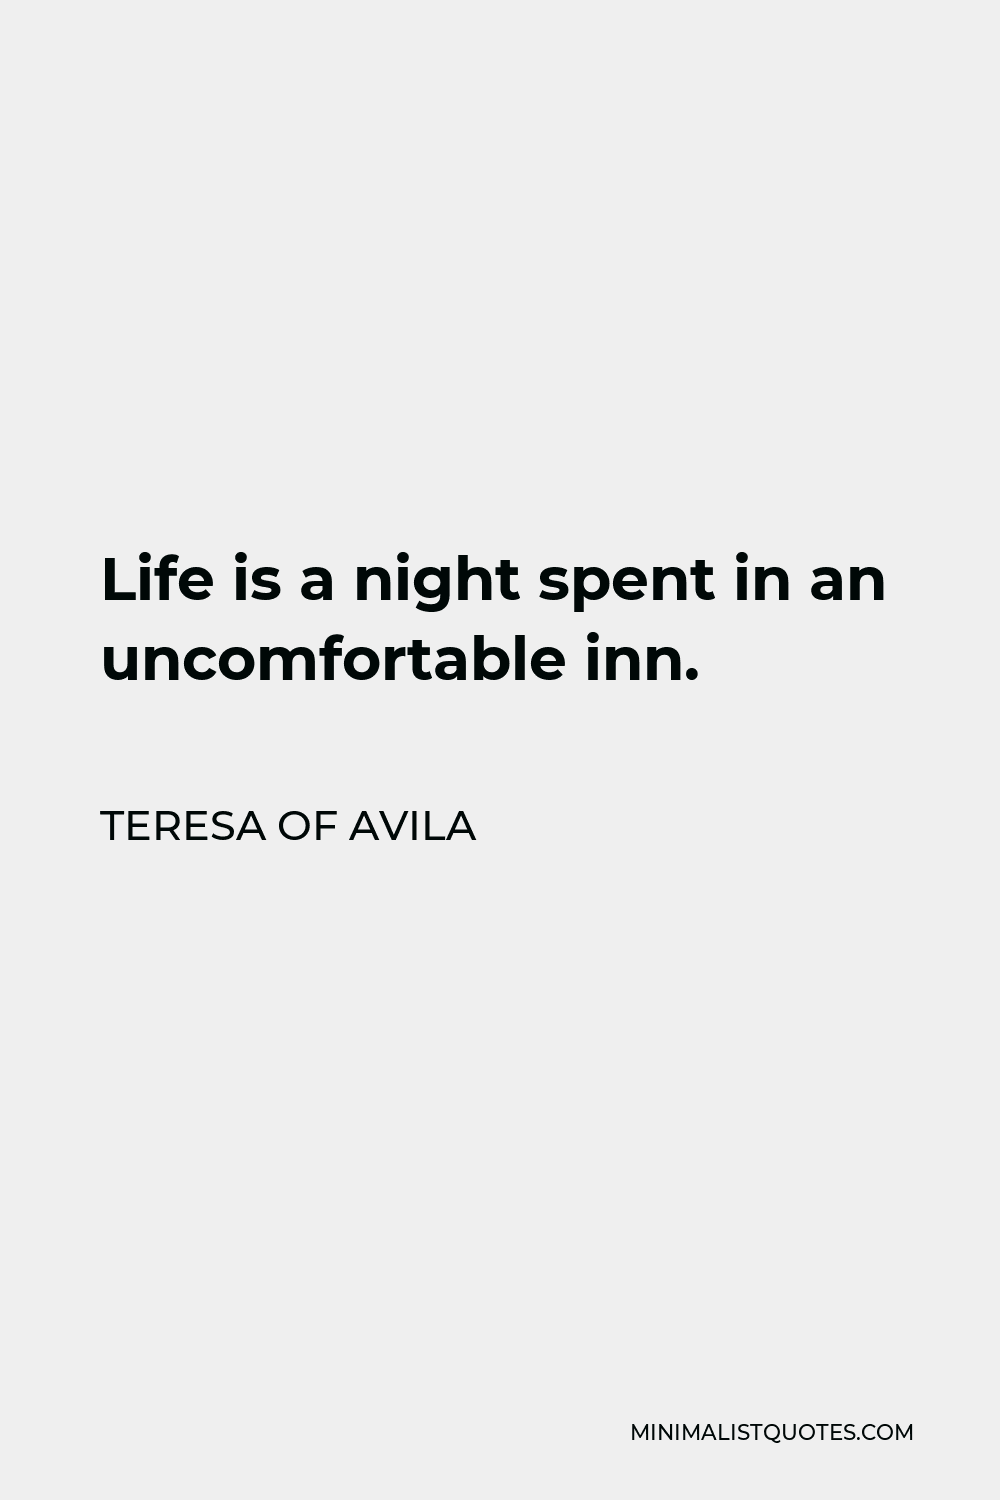 Teresa of Avila Quote - Life is a night spent in an uncomfortable inn.